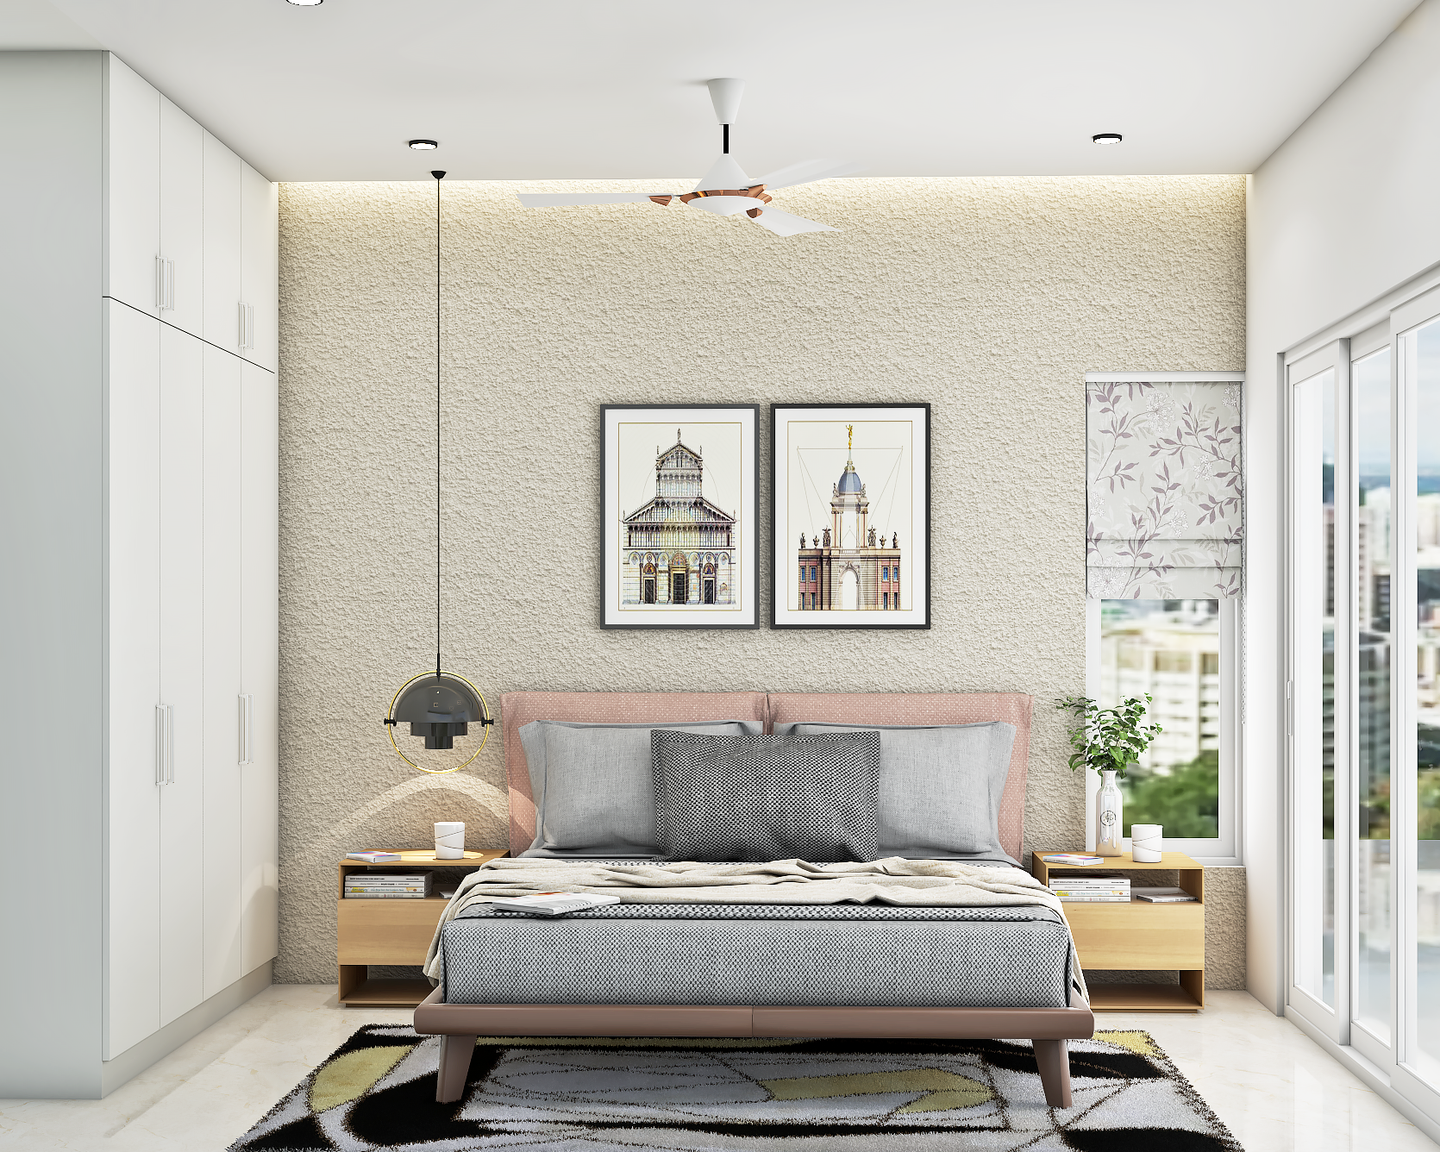 Compact Bedroom with Accent Wall - Livspace